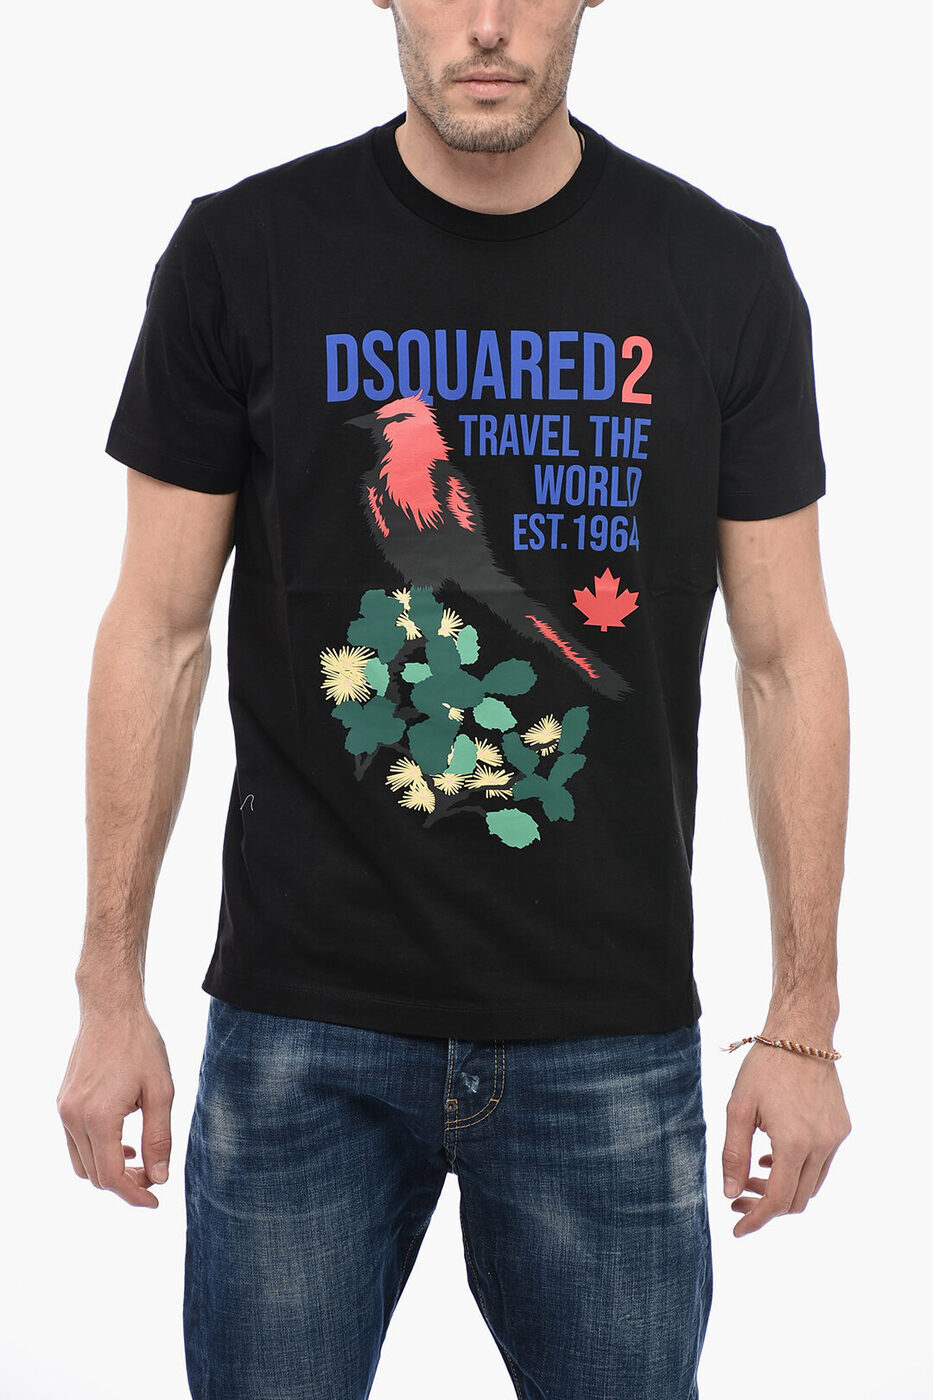 DSQUARED2 ディースクエアード トップス S74GD1054 S23009 900 メンズ PRINTED CREW-NECK T-SHIRT 【関税・送料無料】【ラッピング無料】 dk